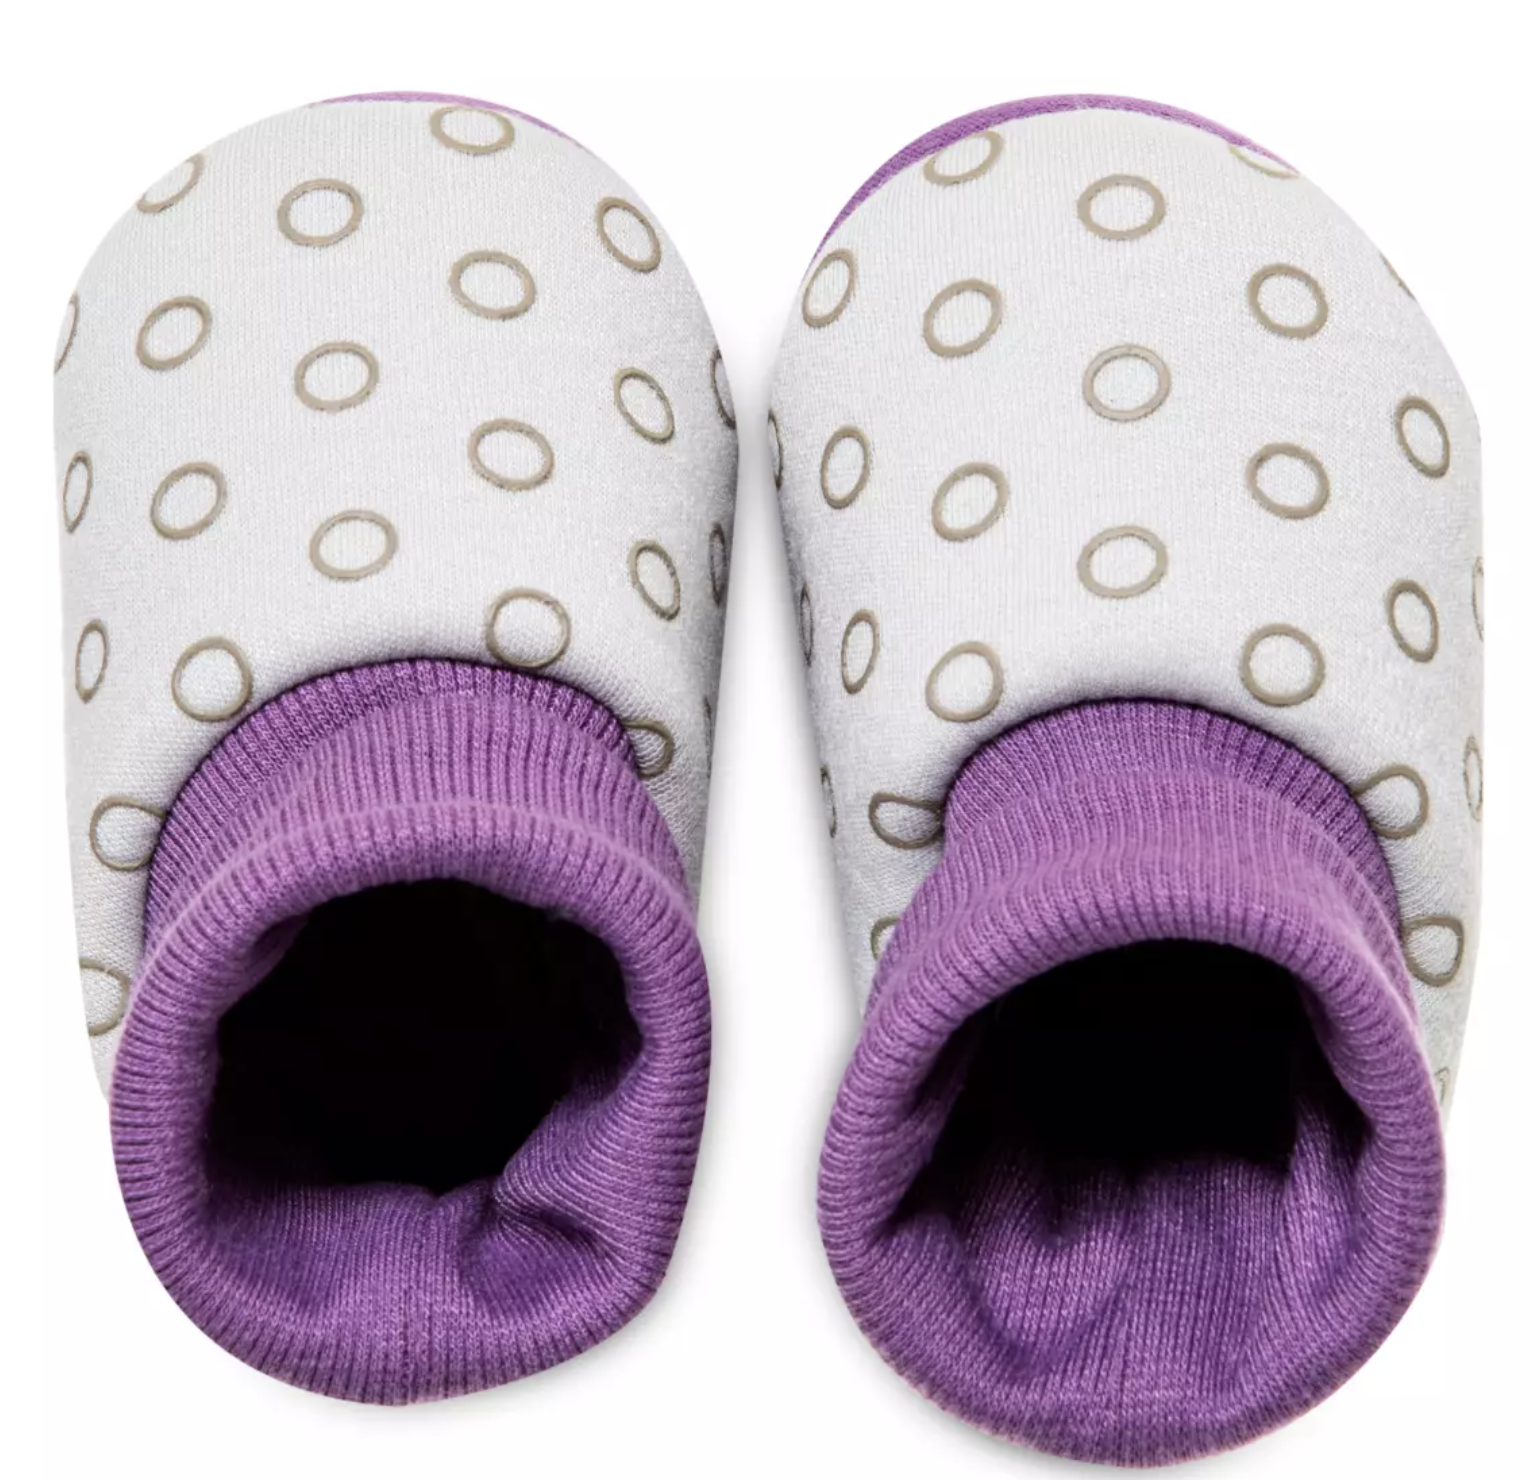 A pair of knit baby shoes inspired by Boo from Monsters, Inc.